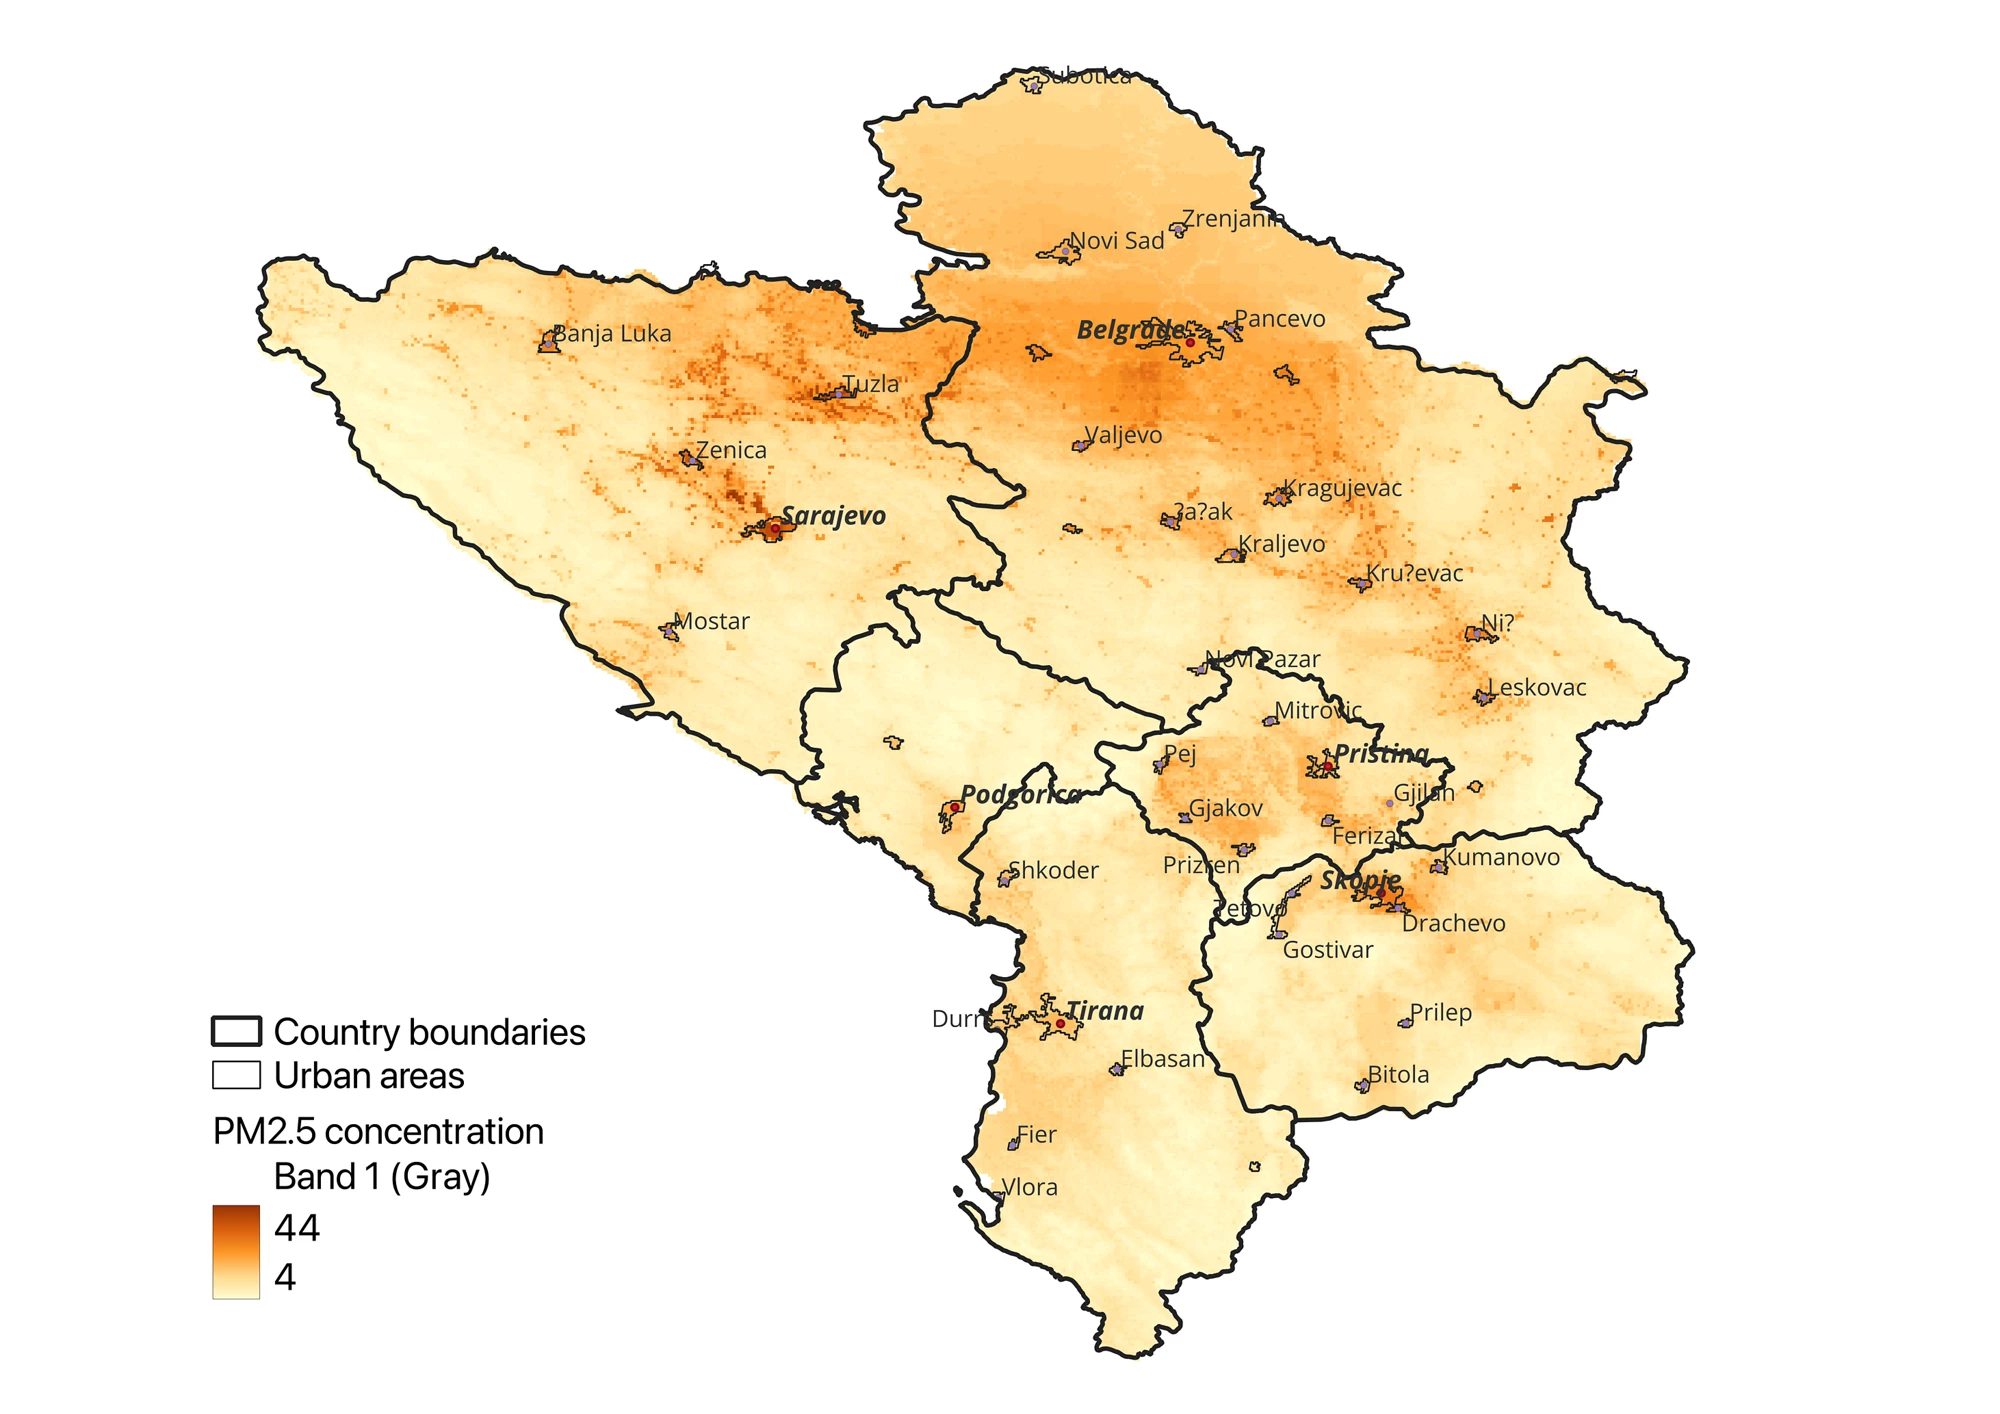 Map showing annual average PM2.5 concentration in cities in the Western Balkans.